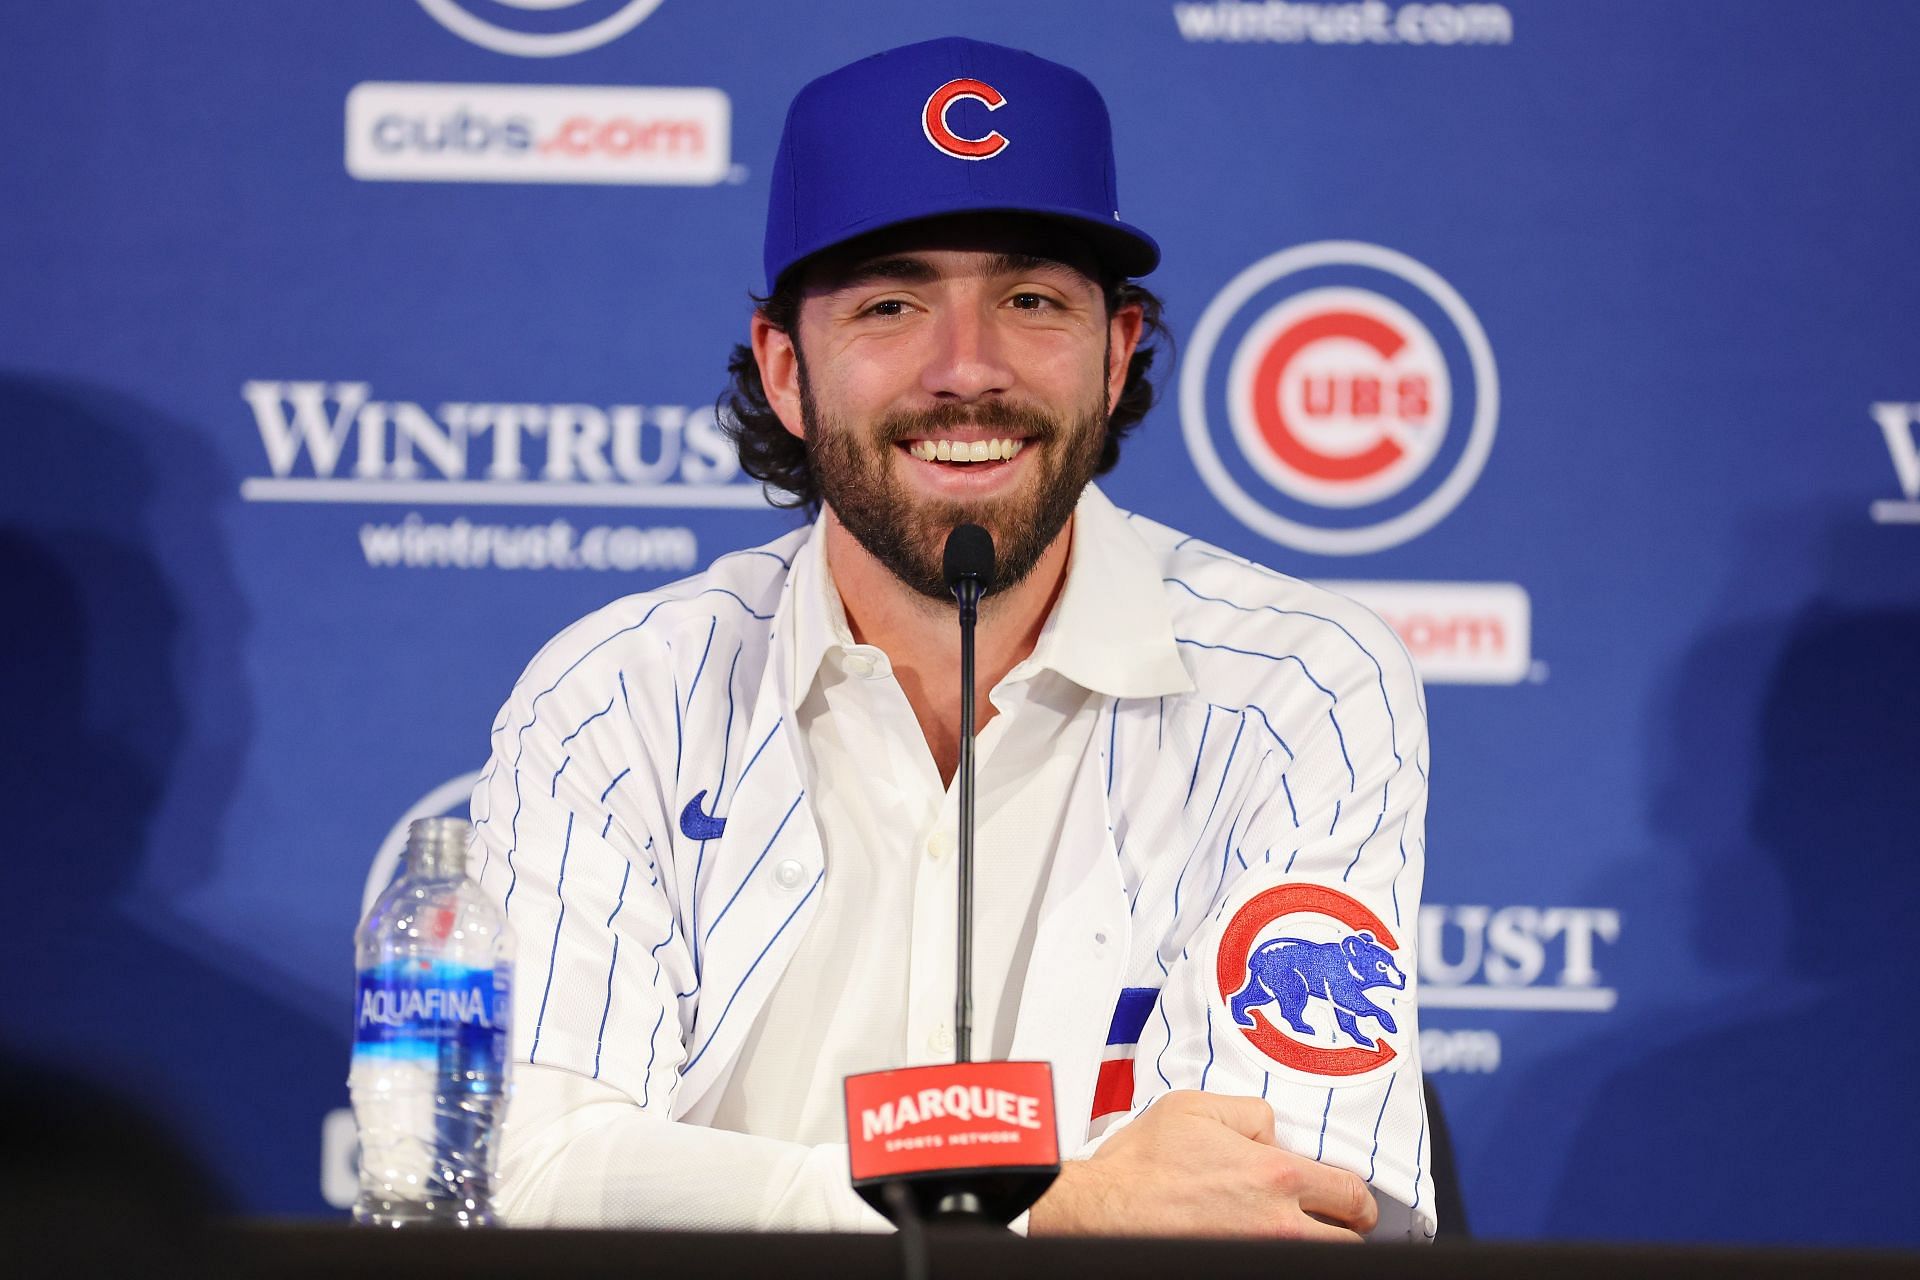 Chicago Cubs, atlanta braves, Dansby Swanson, MLB: Chicago Cubs shortstop Dansby  Swanson enjoys romantic date night with wife Mallory Pugh